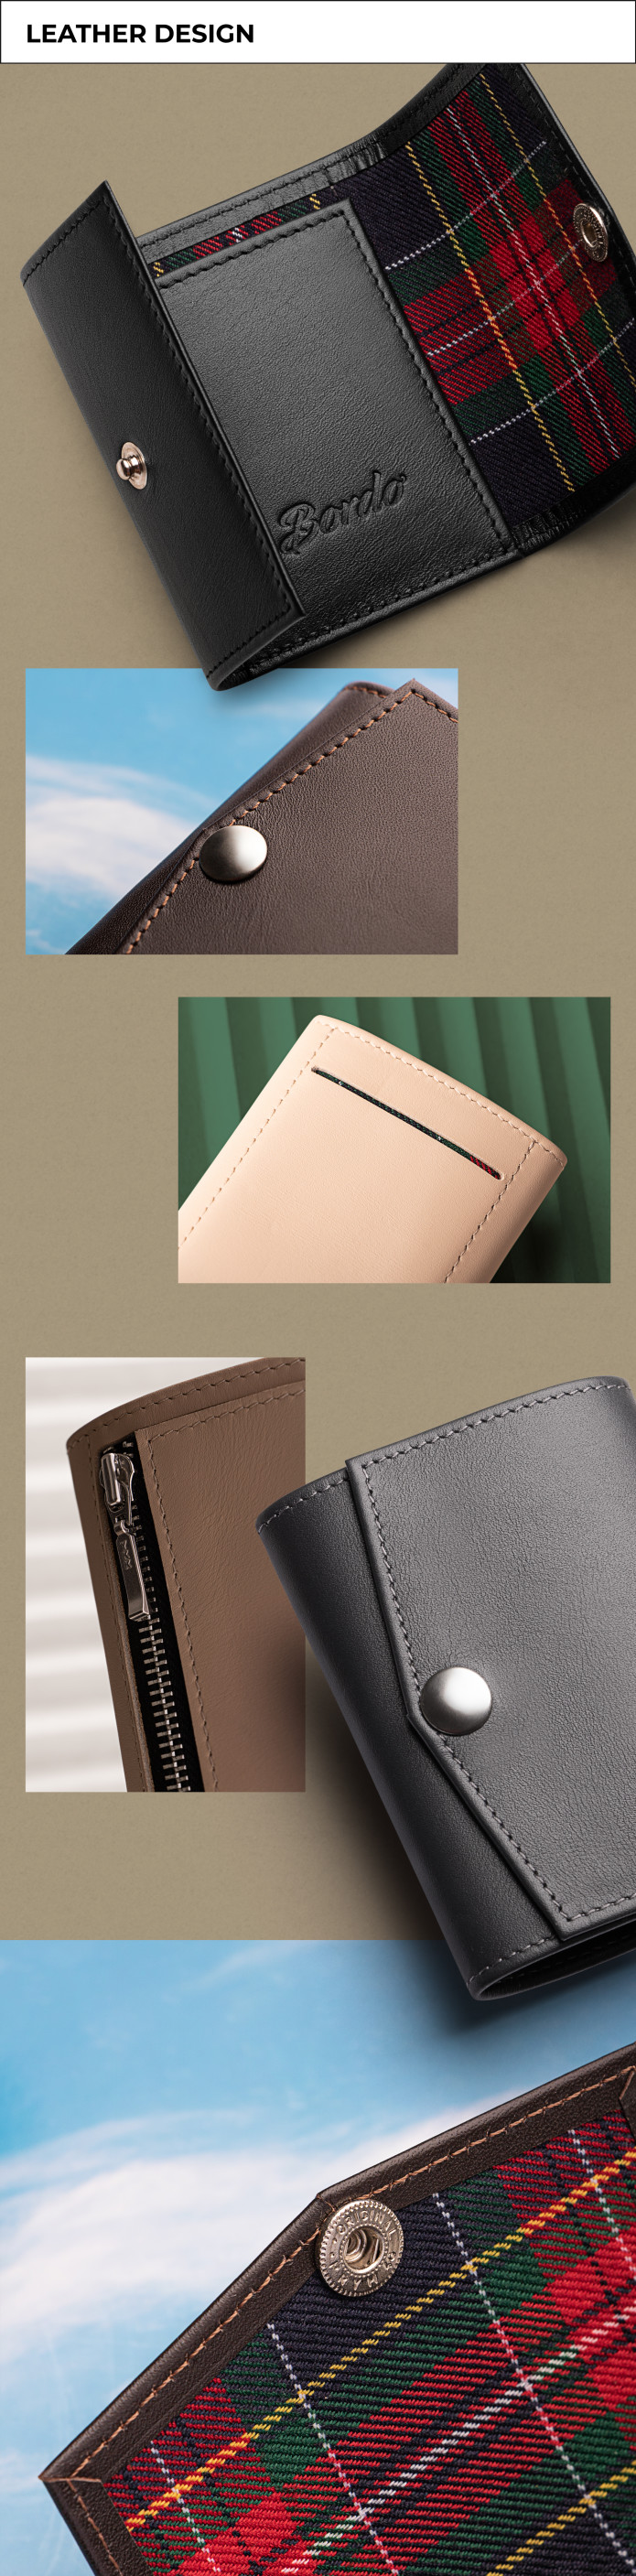 Small Leather or Fabric Wallet. RFID Protection | Indiegogo